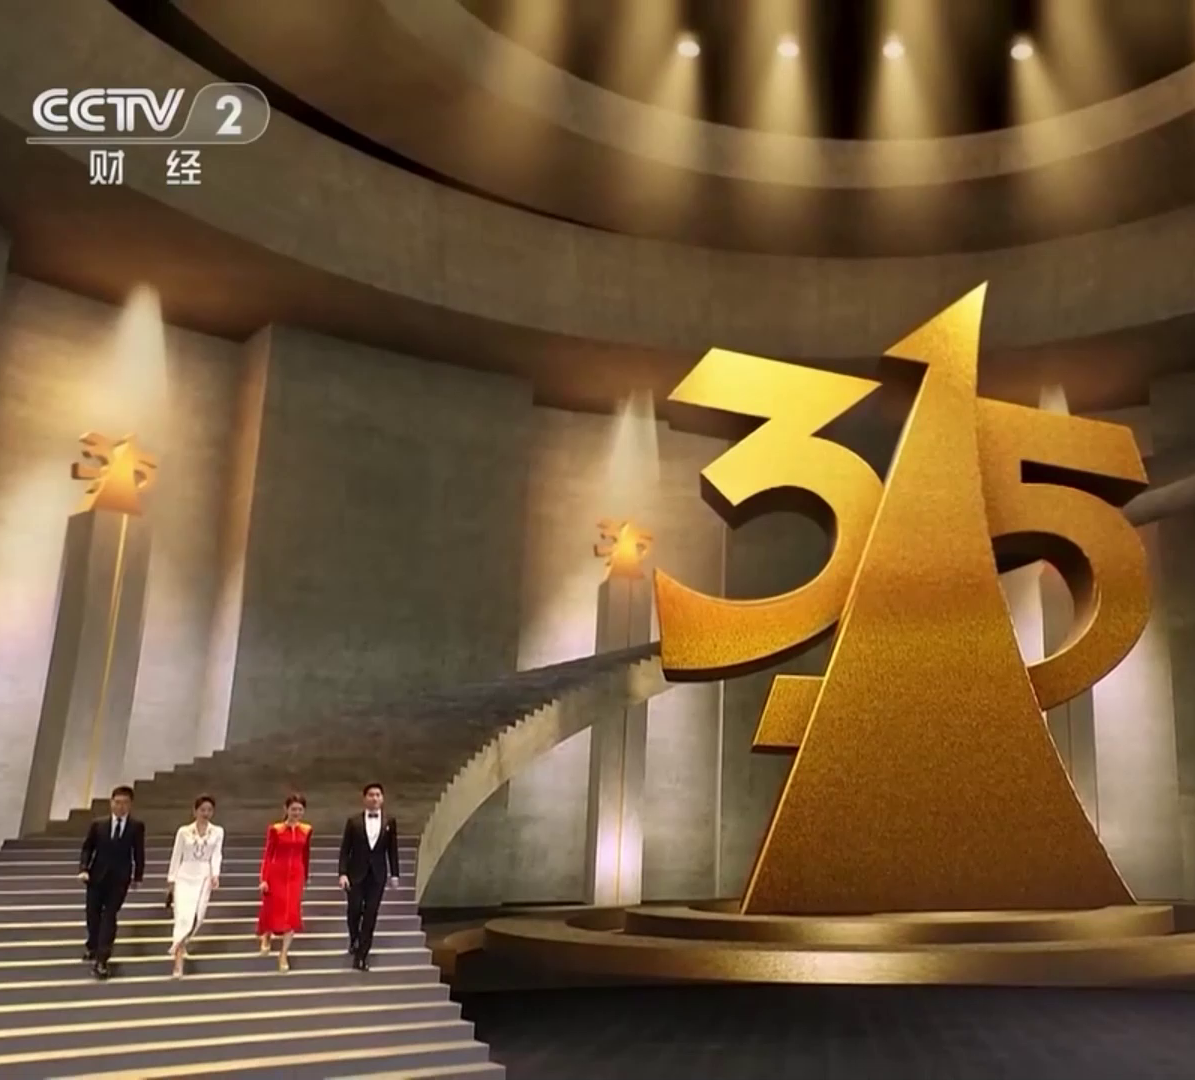 4 CCTV TV hosts descending stairs in a large virtual studio